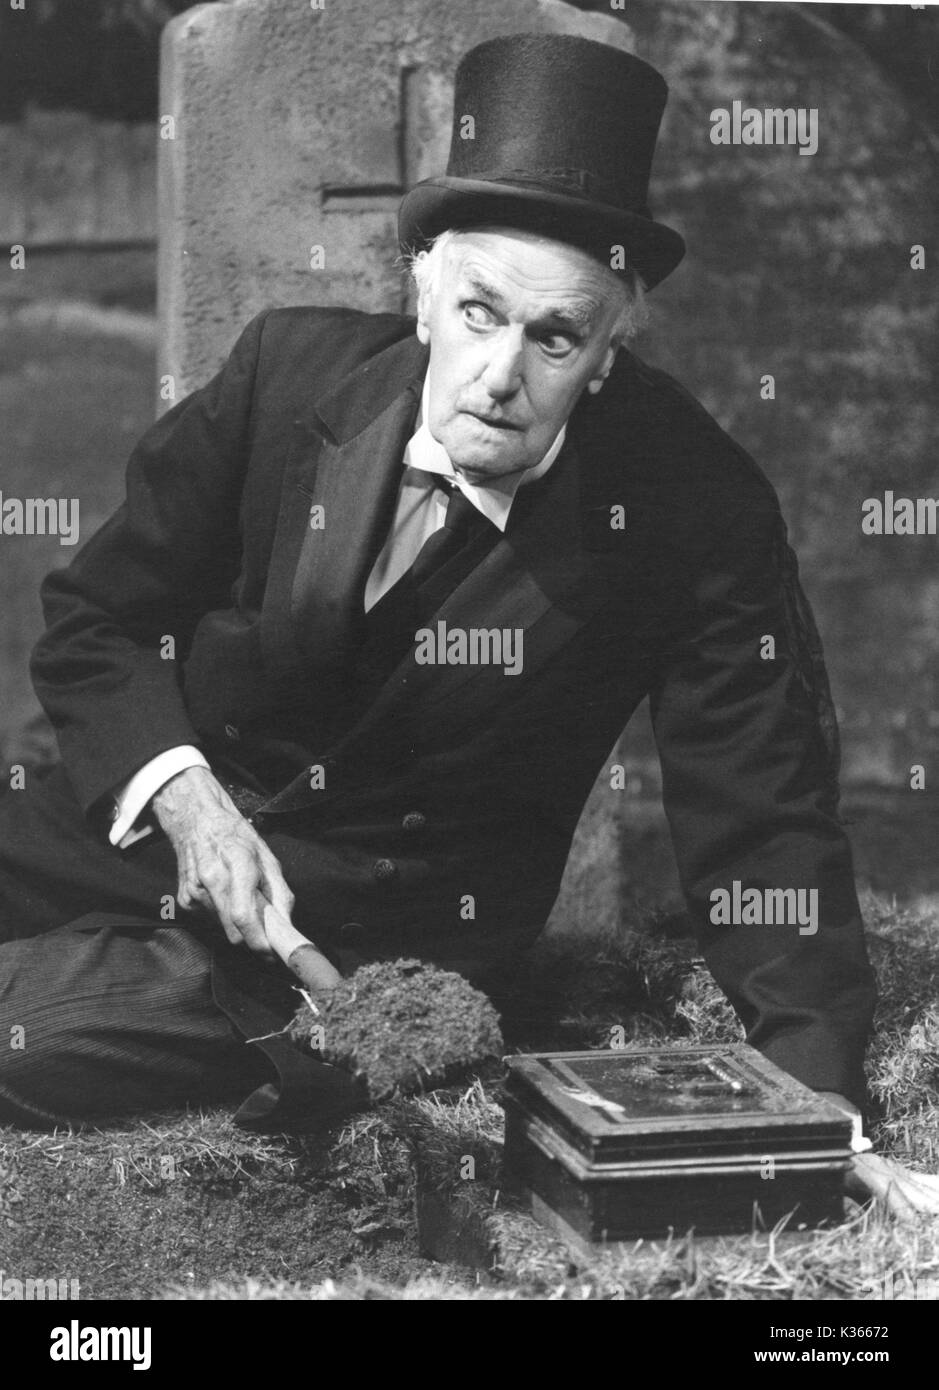 DAD'S ARMY [UK TV SERIES 1968-1977] JOHN LAURIE BRITISH BROADCASTING CORPORATION ( BBC) DAD'S ARMY [BR TV SERIES 1968-1977] JOHN LAURIE Stockfoto